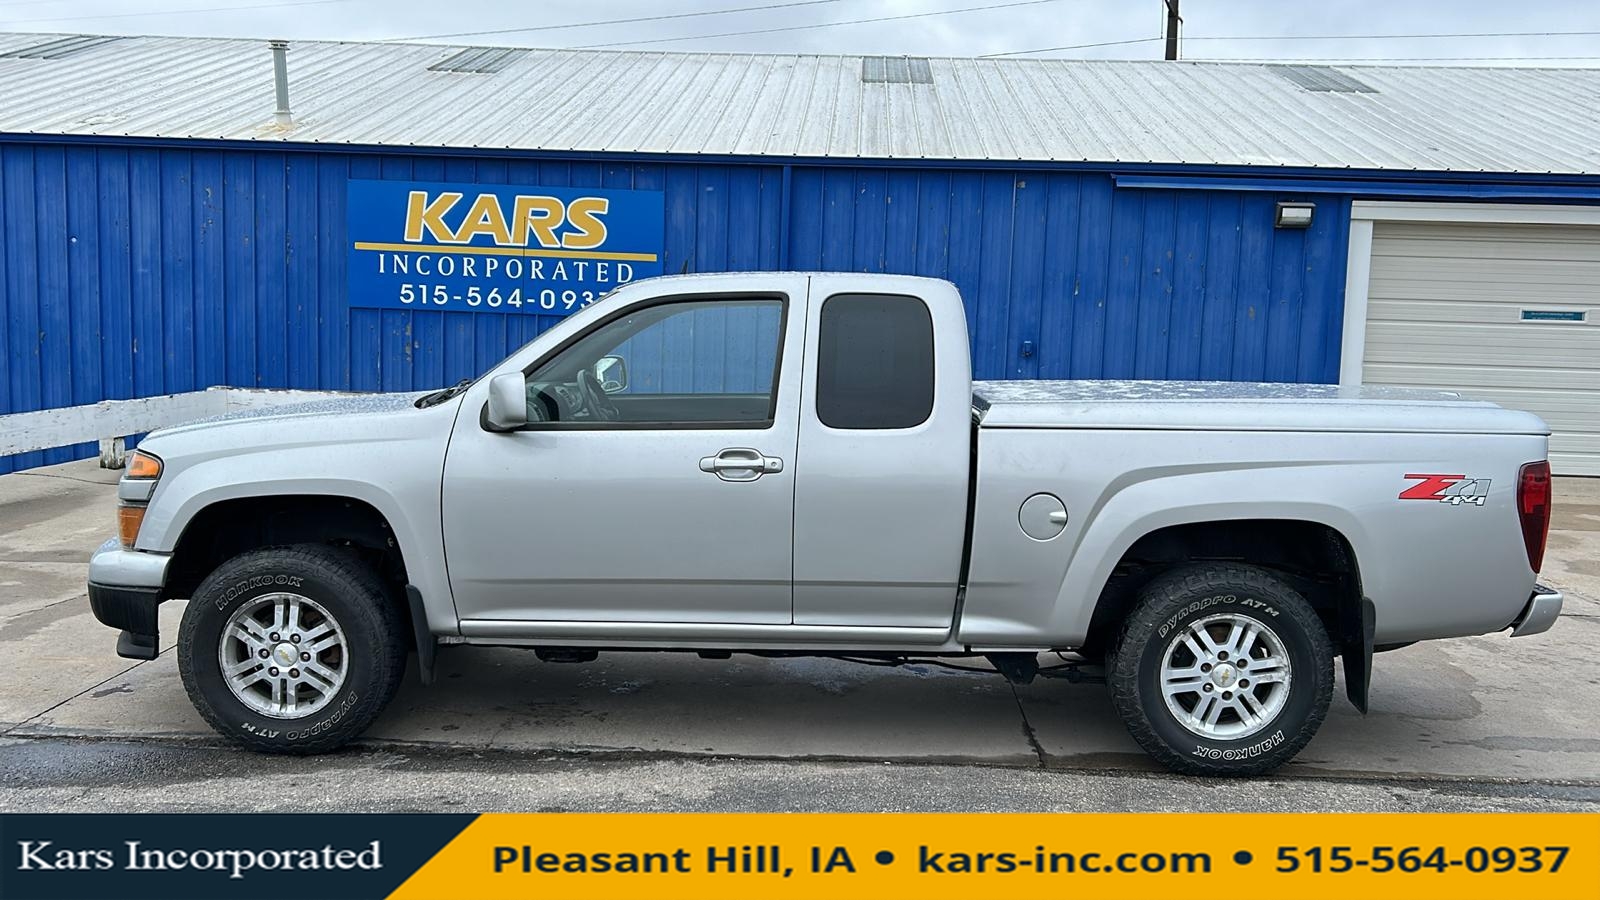 2010 Chevrolet Colorado LT 4WD Extended Cab  - A48997P  - Kars Incorporated